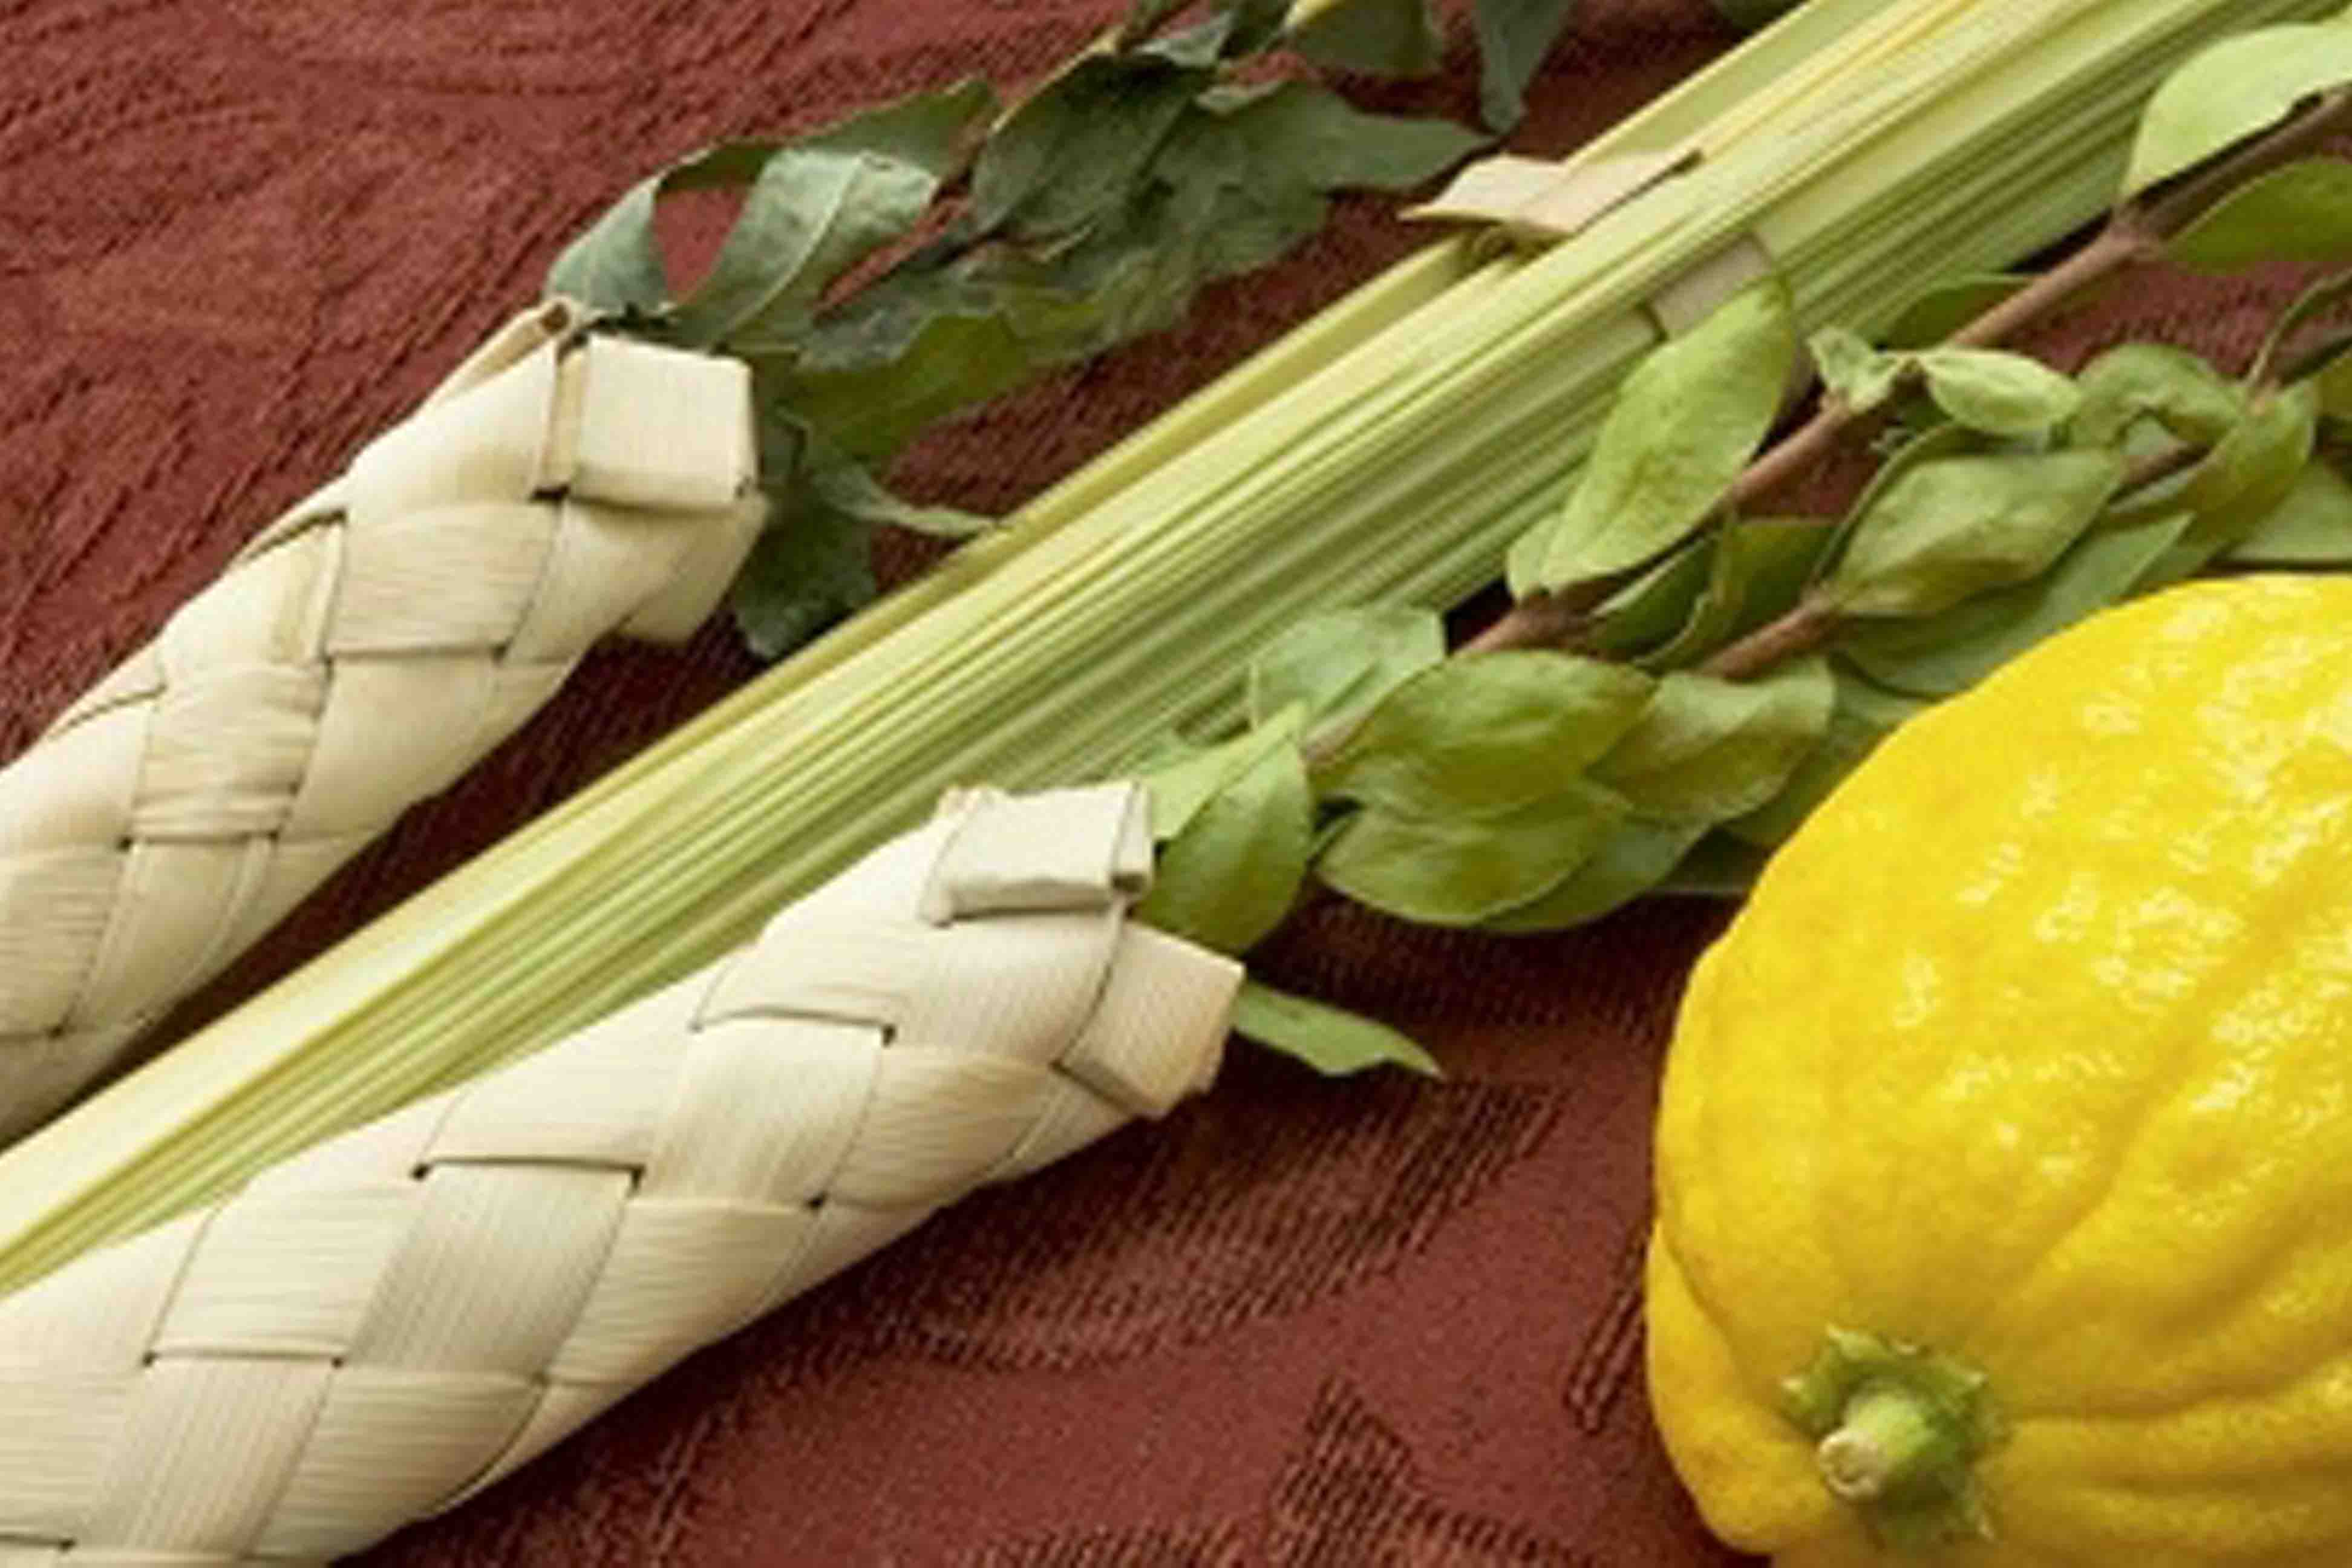 lulav and etrog bring blessing to the world through  the seven Sephirot. From the Zohar